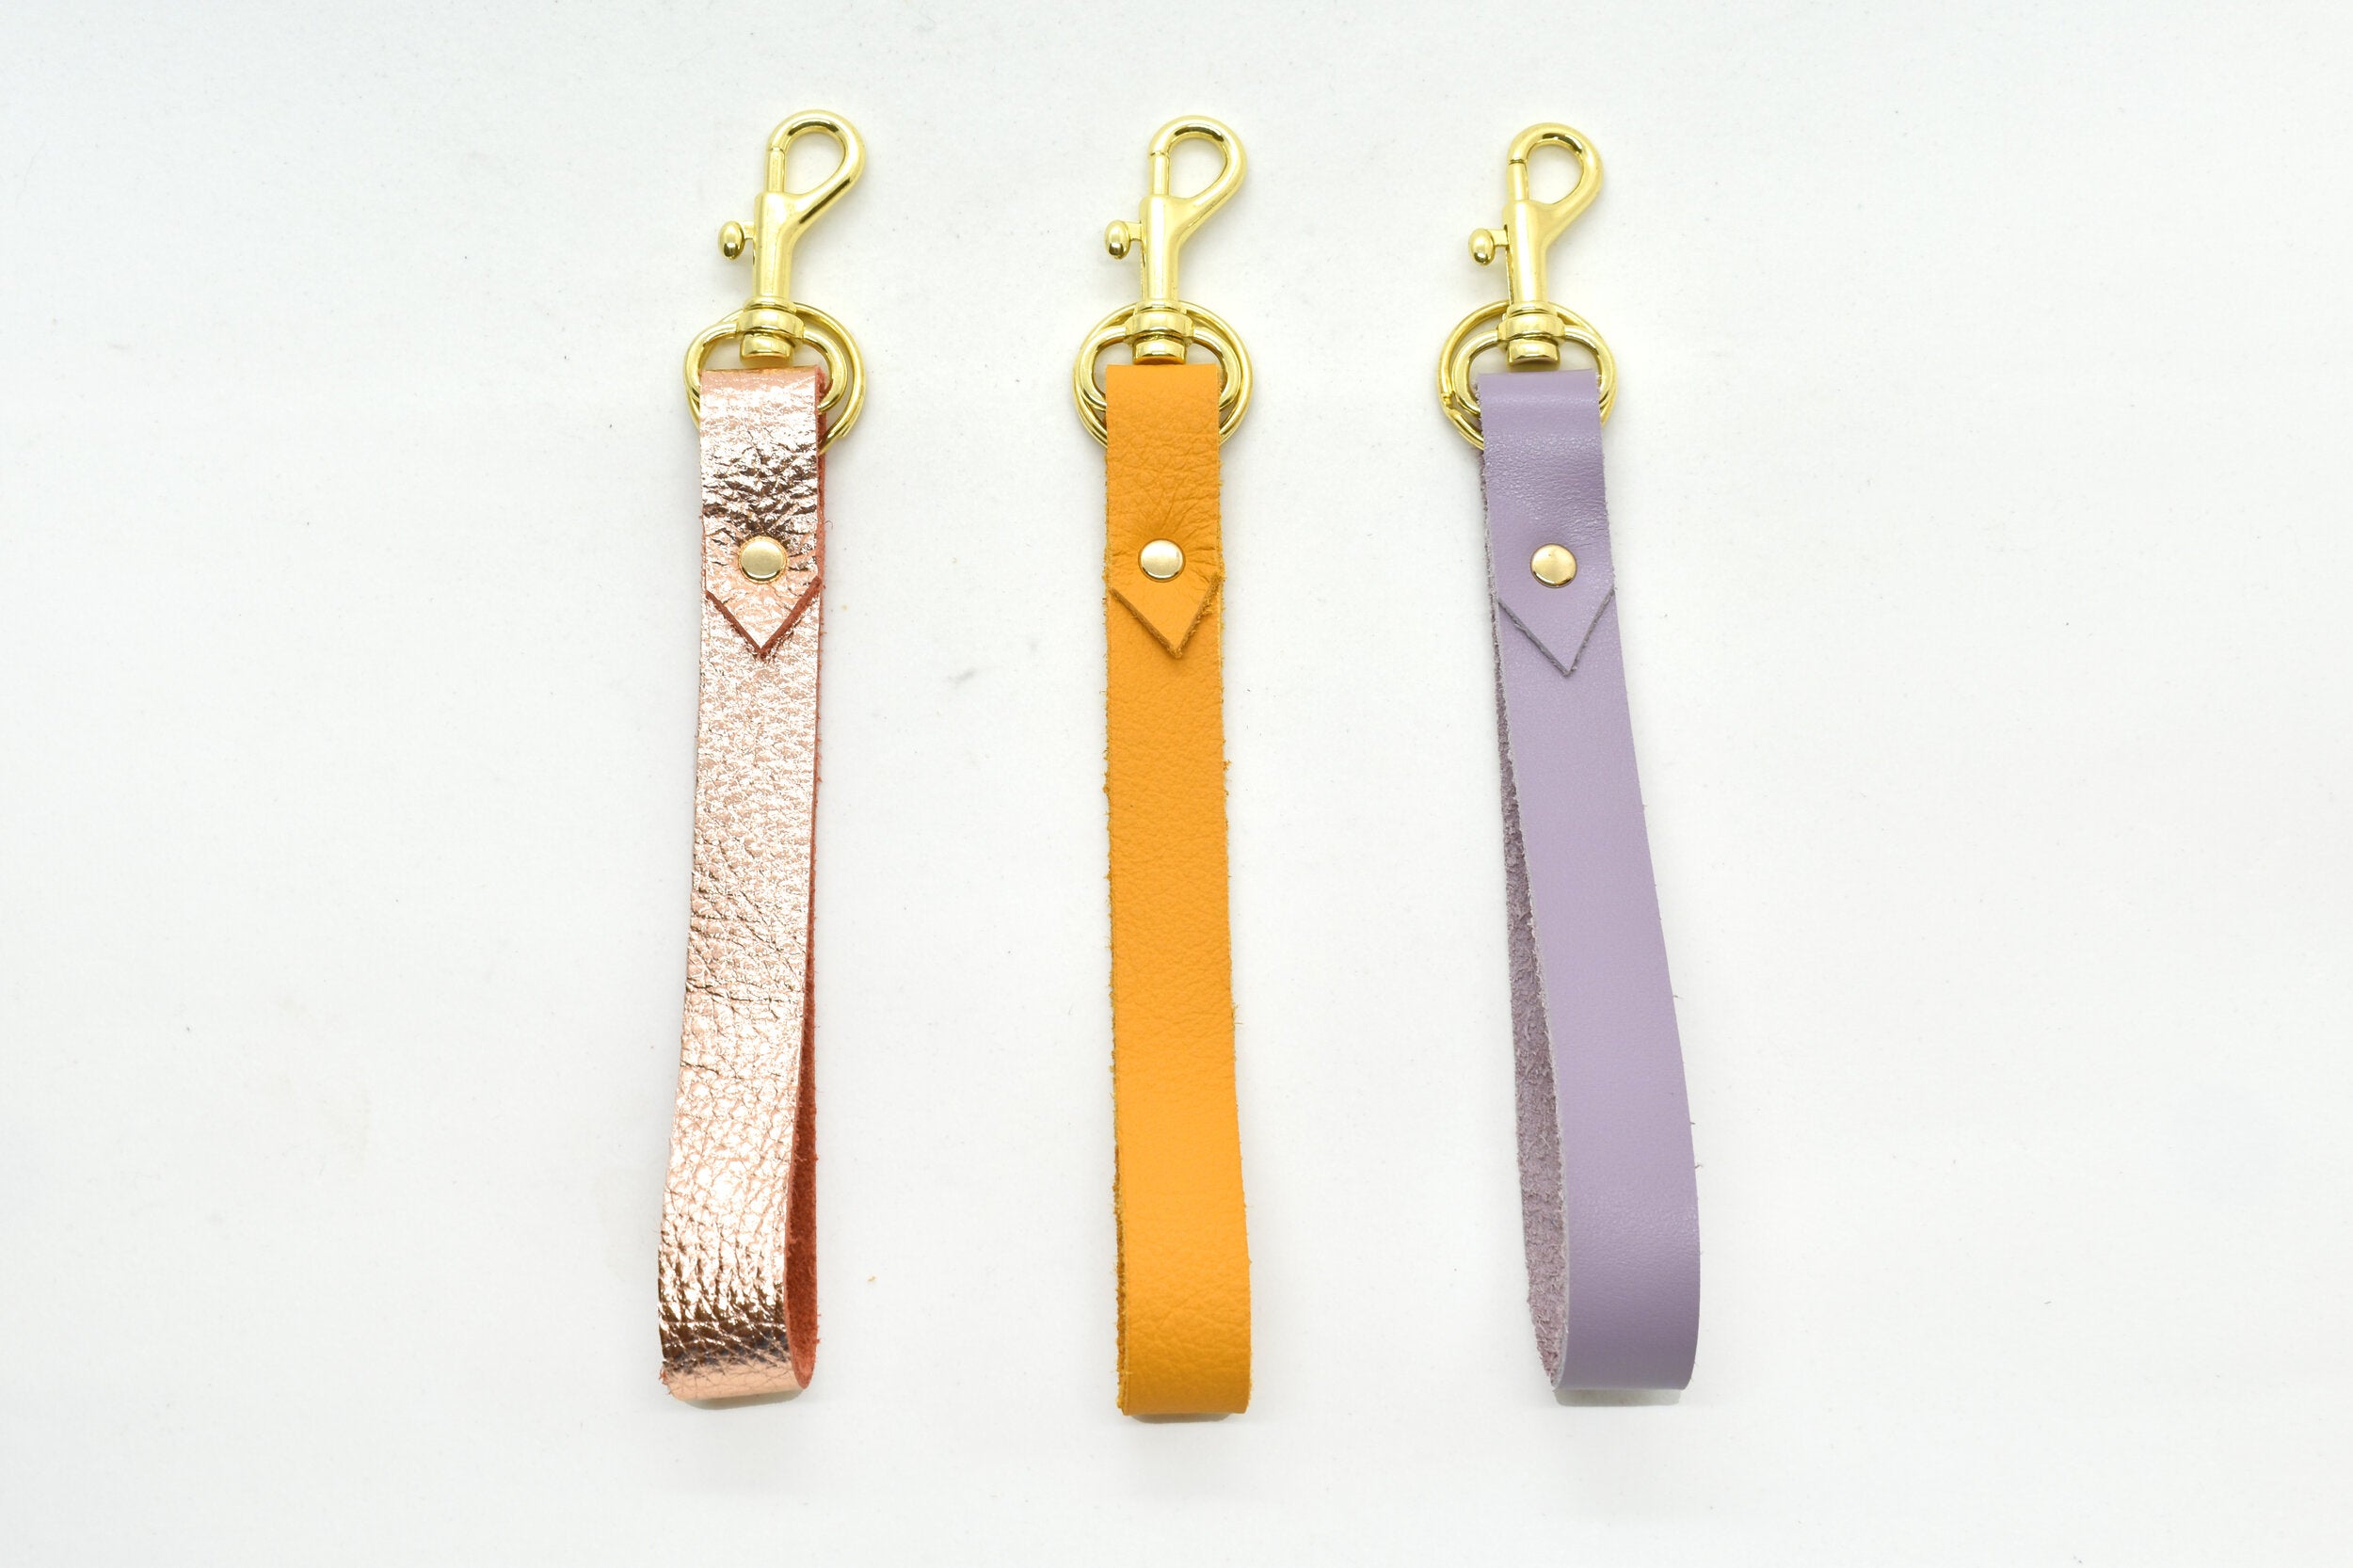 leather loop minimal and modern key chains in marigold lavender and metallic rose leather